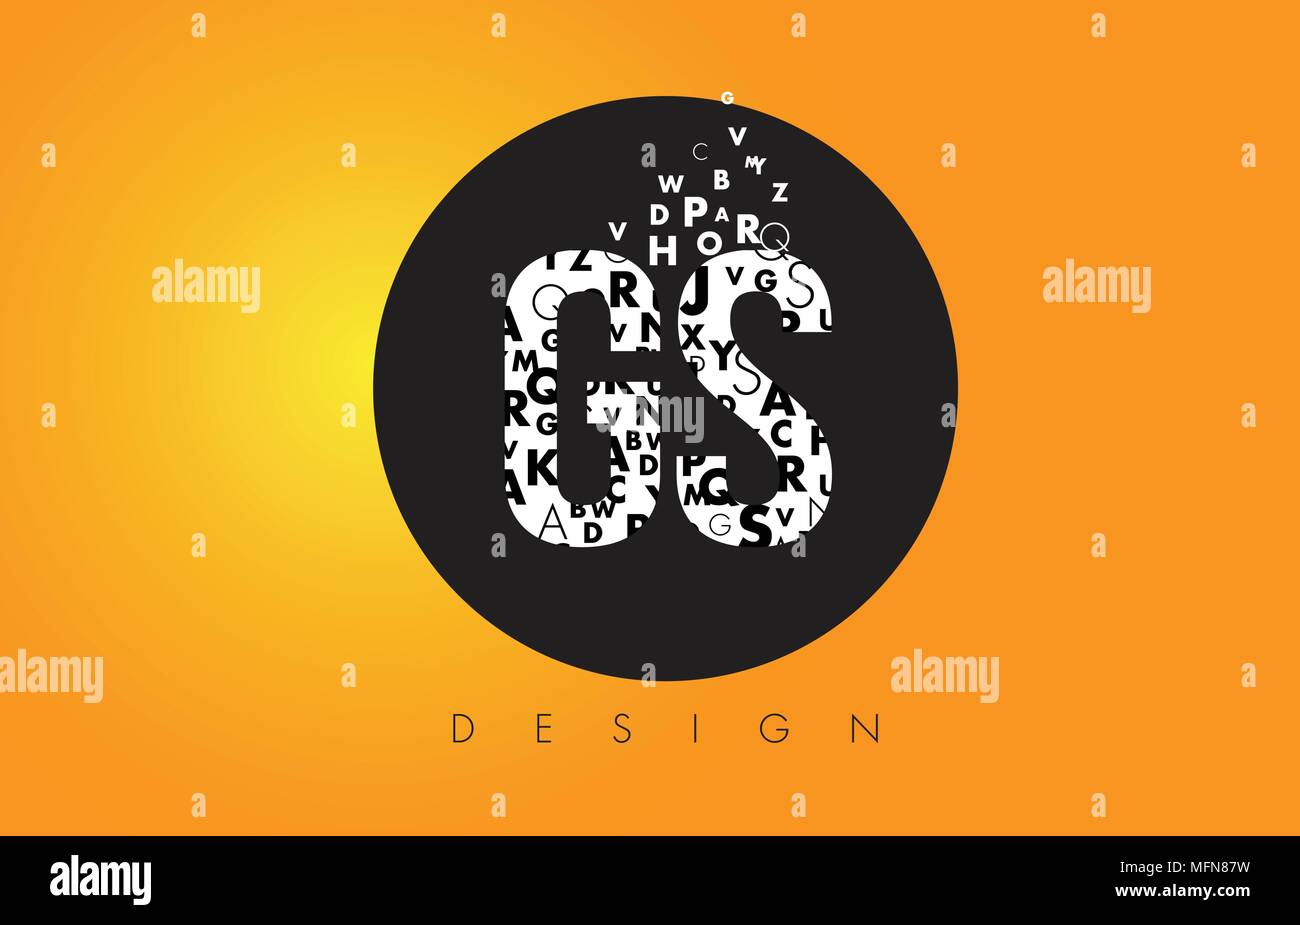 GS G S Logo Design Made of Small Letters with Black Circle and Yellow Background. Stock Vector